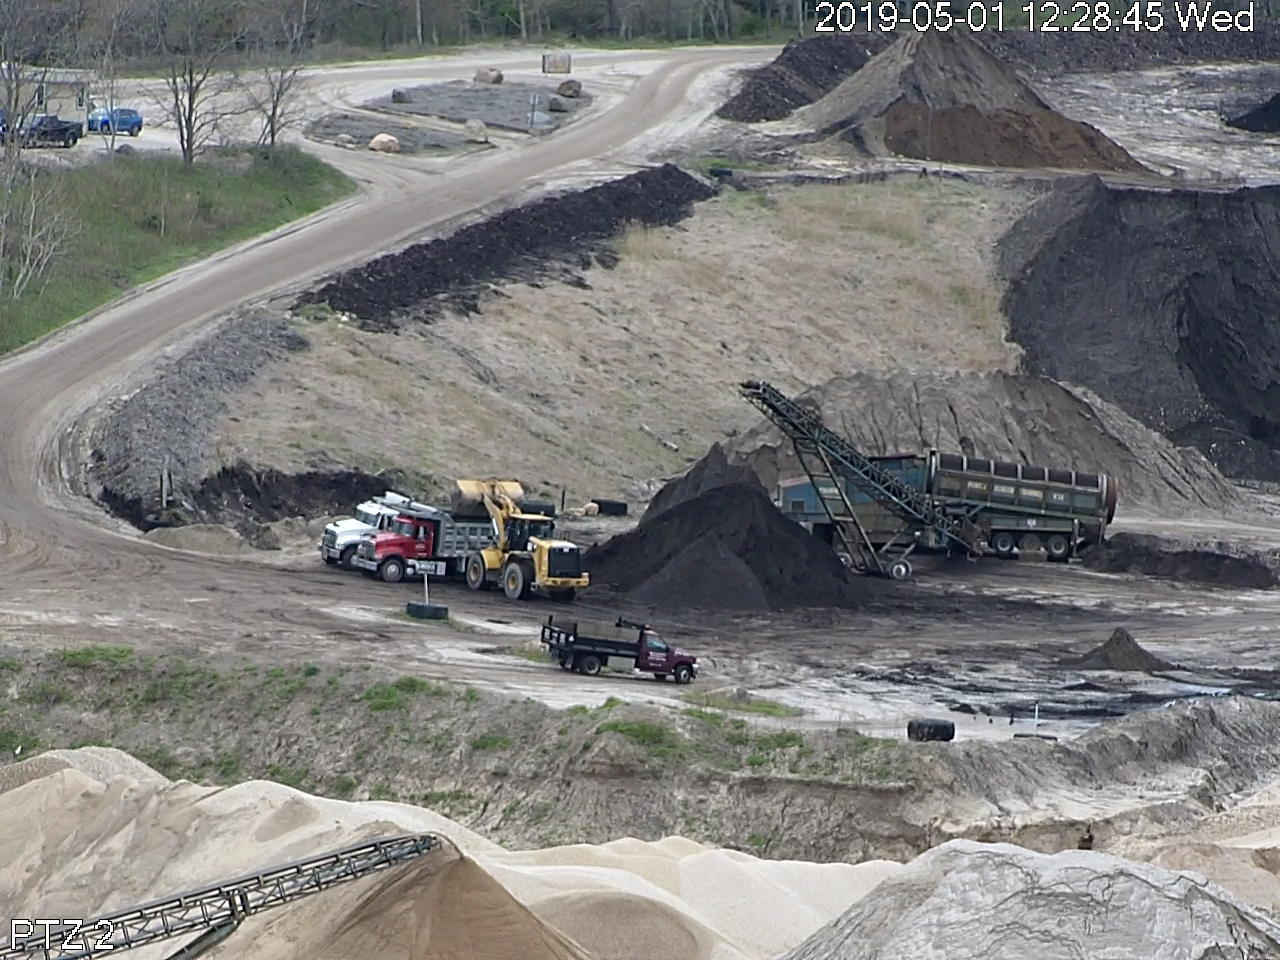 Loading up on mulch from John Tintle’s Sand Land pit, as seen from one of Sam and Keith Christiansen’s surveillance cameras.